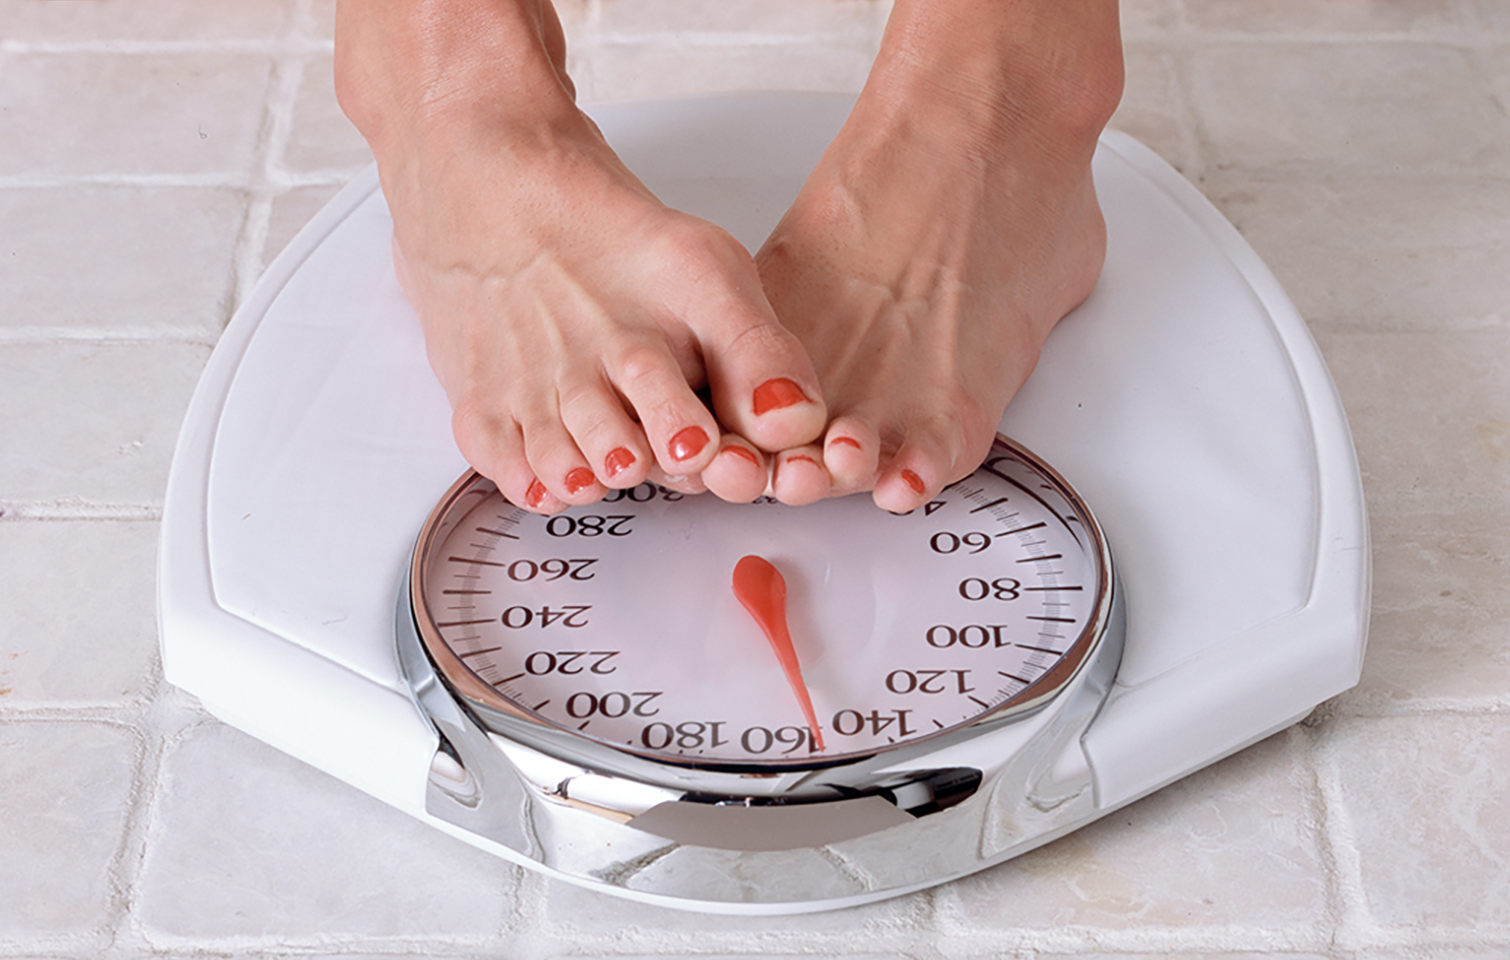 How to lose weight in menopause